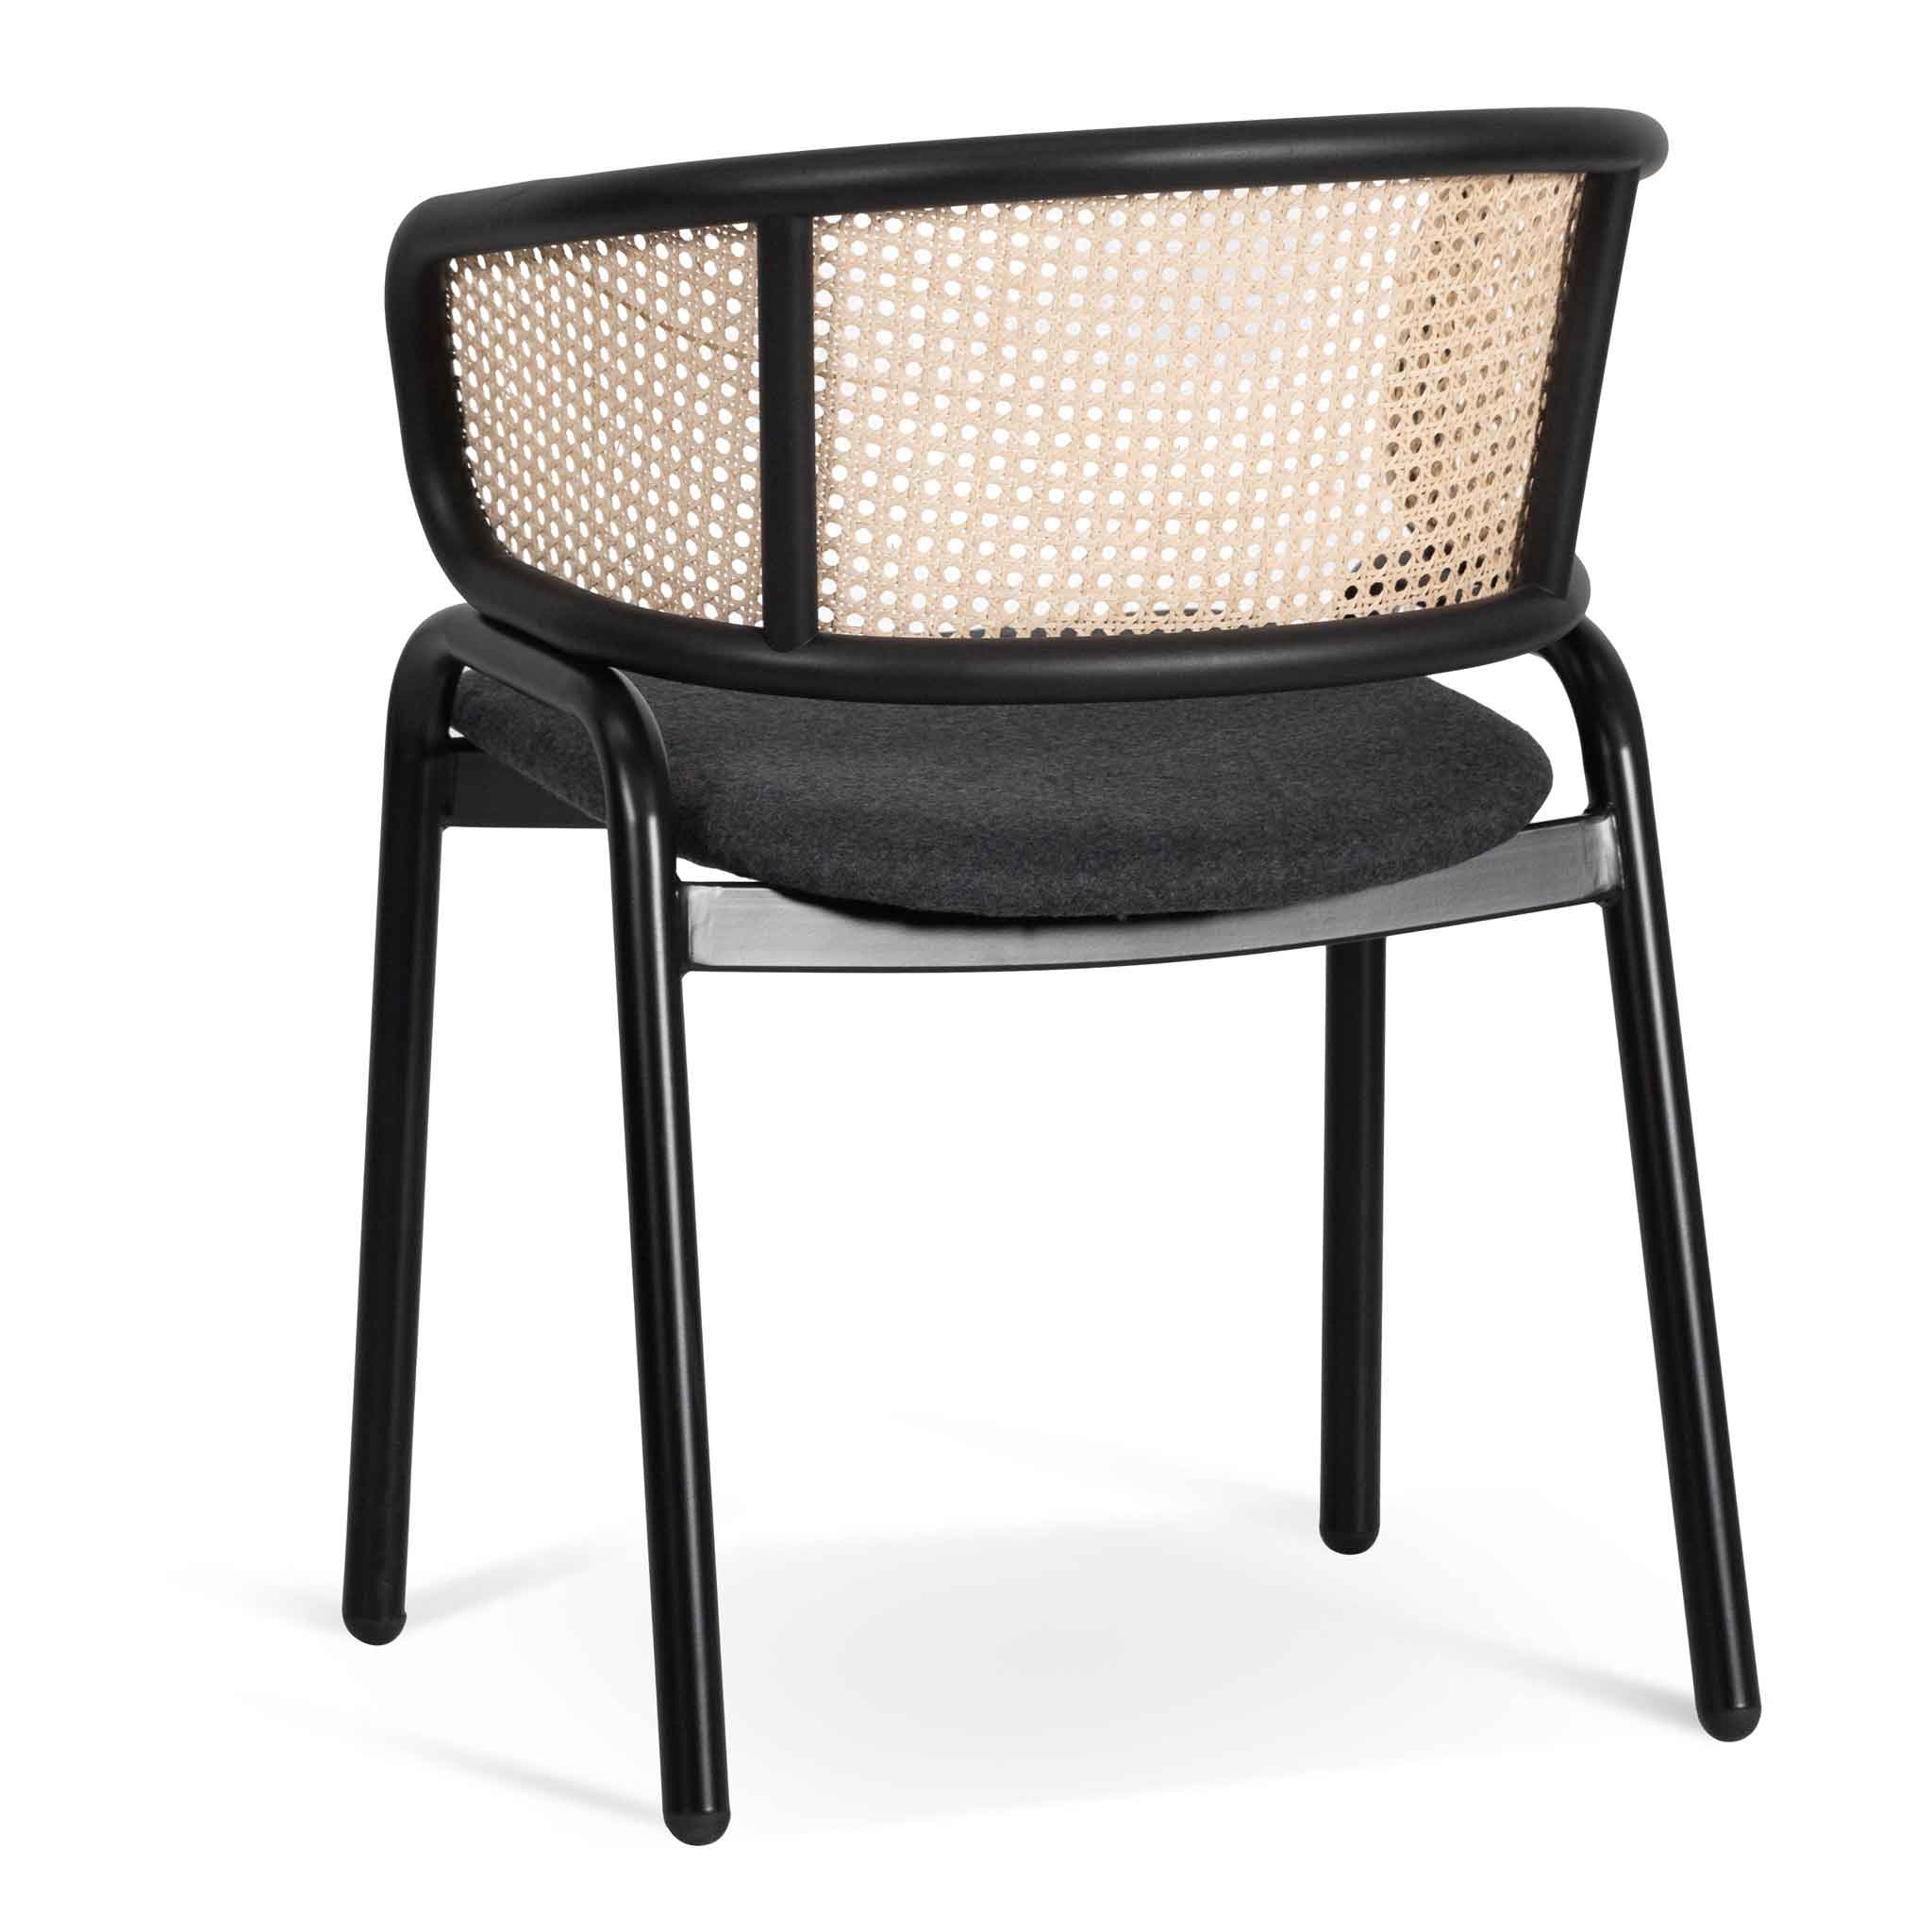 Fanny Fabric Dining Chair - Grey with Rattan Back - Dining Chairs